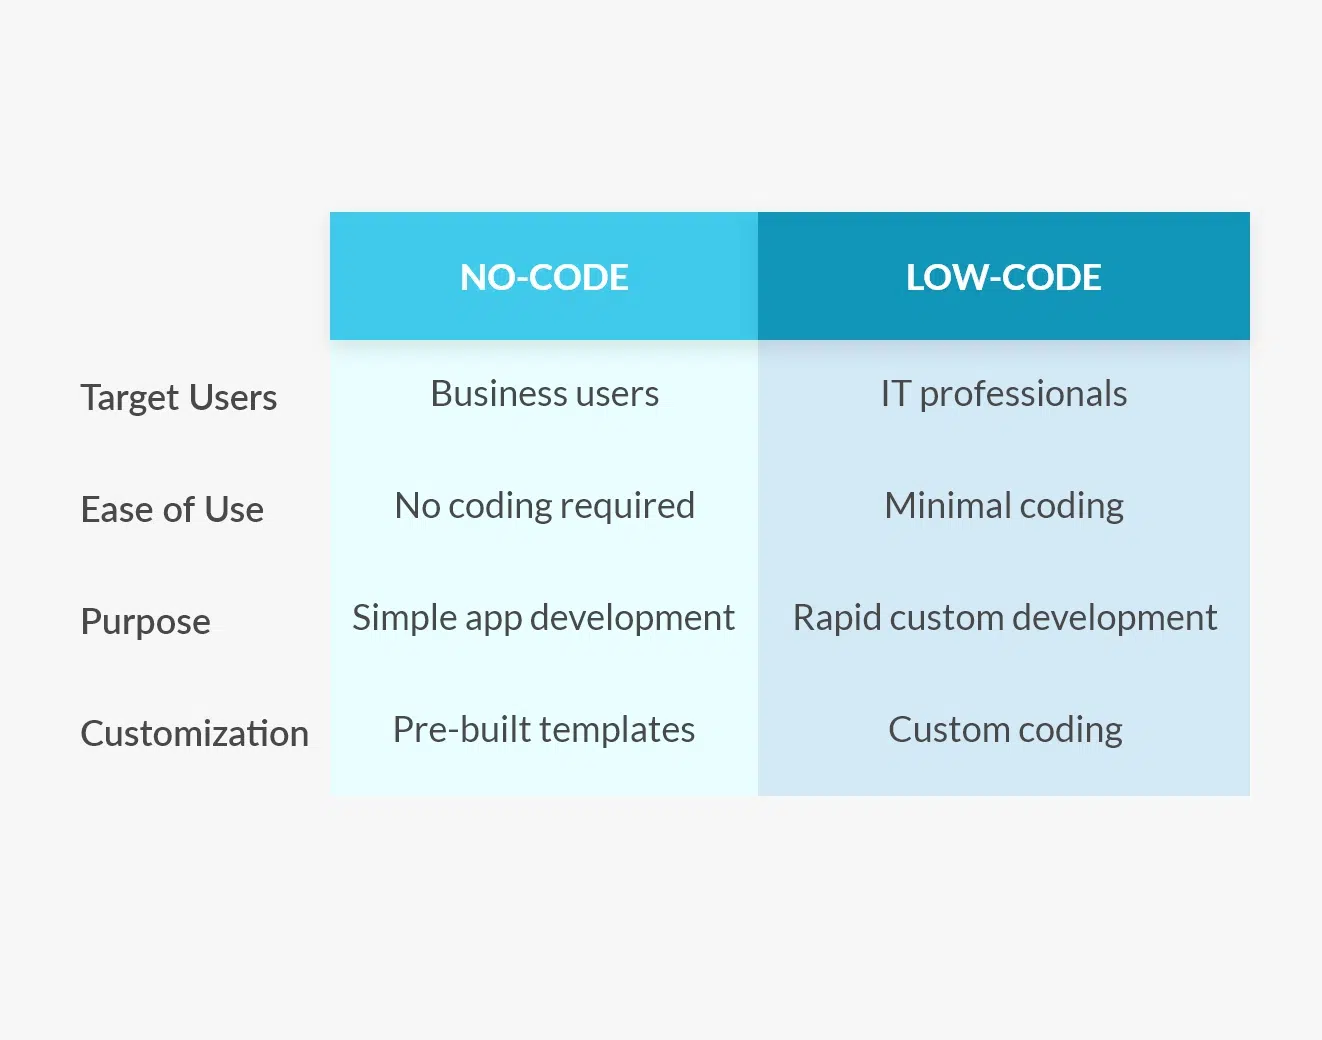 What’s the Difference Between Low-Code and No-Code?